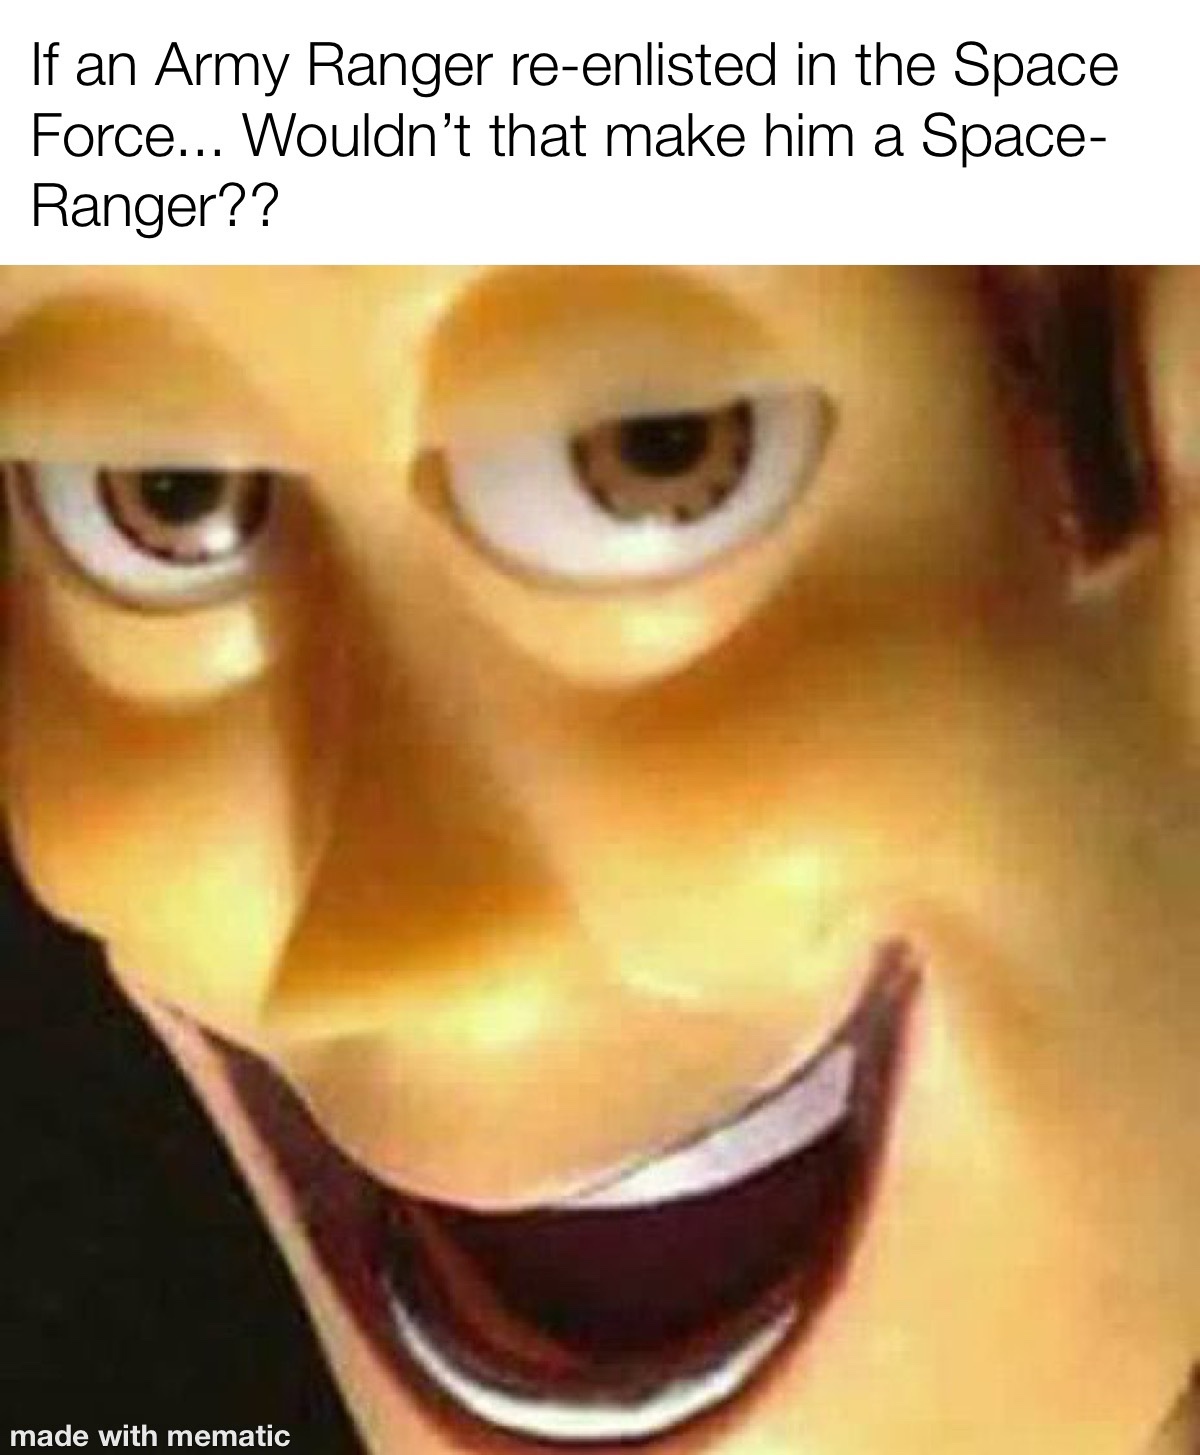 I think the word you are looking for is "Space Ranger ...